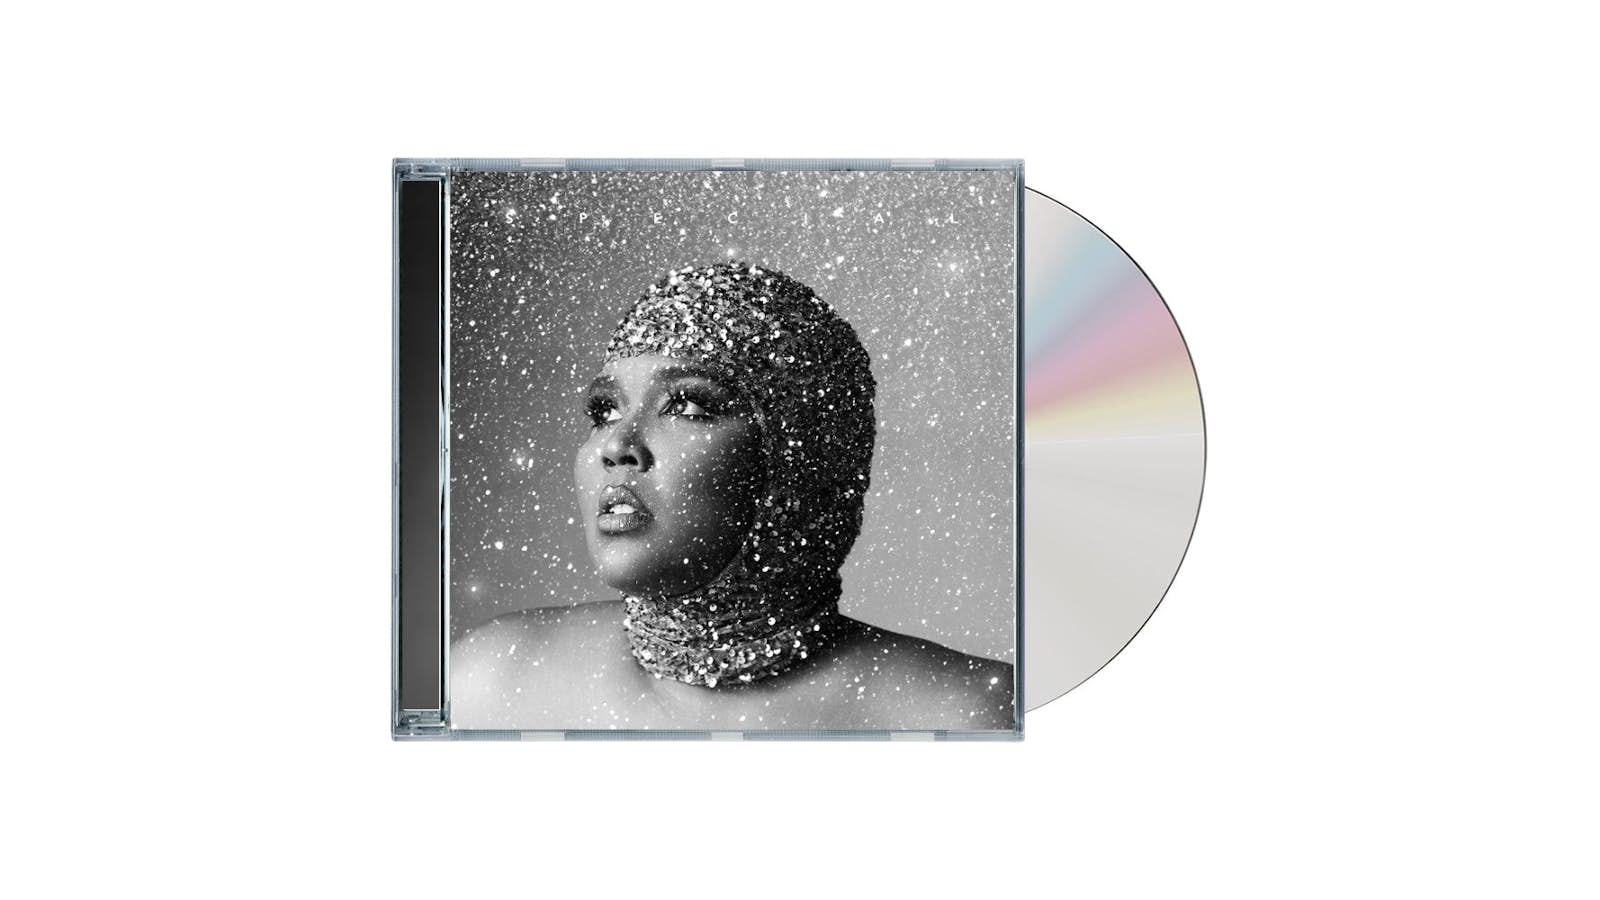 Lizzo - Special CD (Hand Glittered by Lizzo) BRAND NEW Sealed Sold